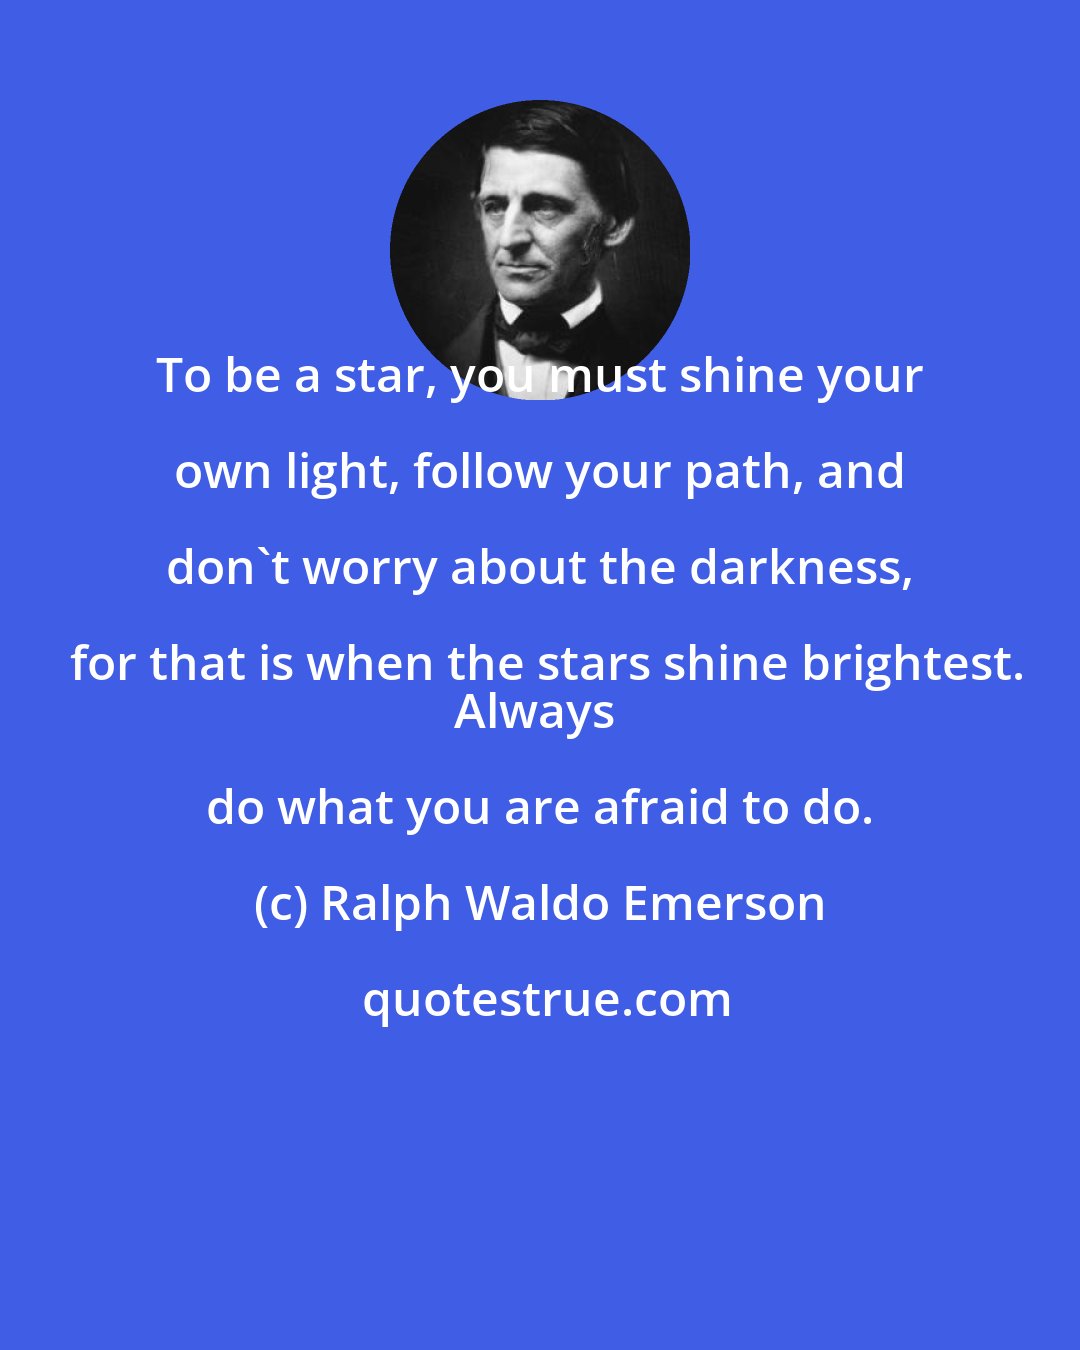 Ralph Waldo Emerson: To be a star, you must shine your own light, follow your path, and don't worry about the darkness, for that is when the stars shine brightest.
Always do what you are afraid to do.